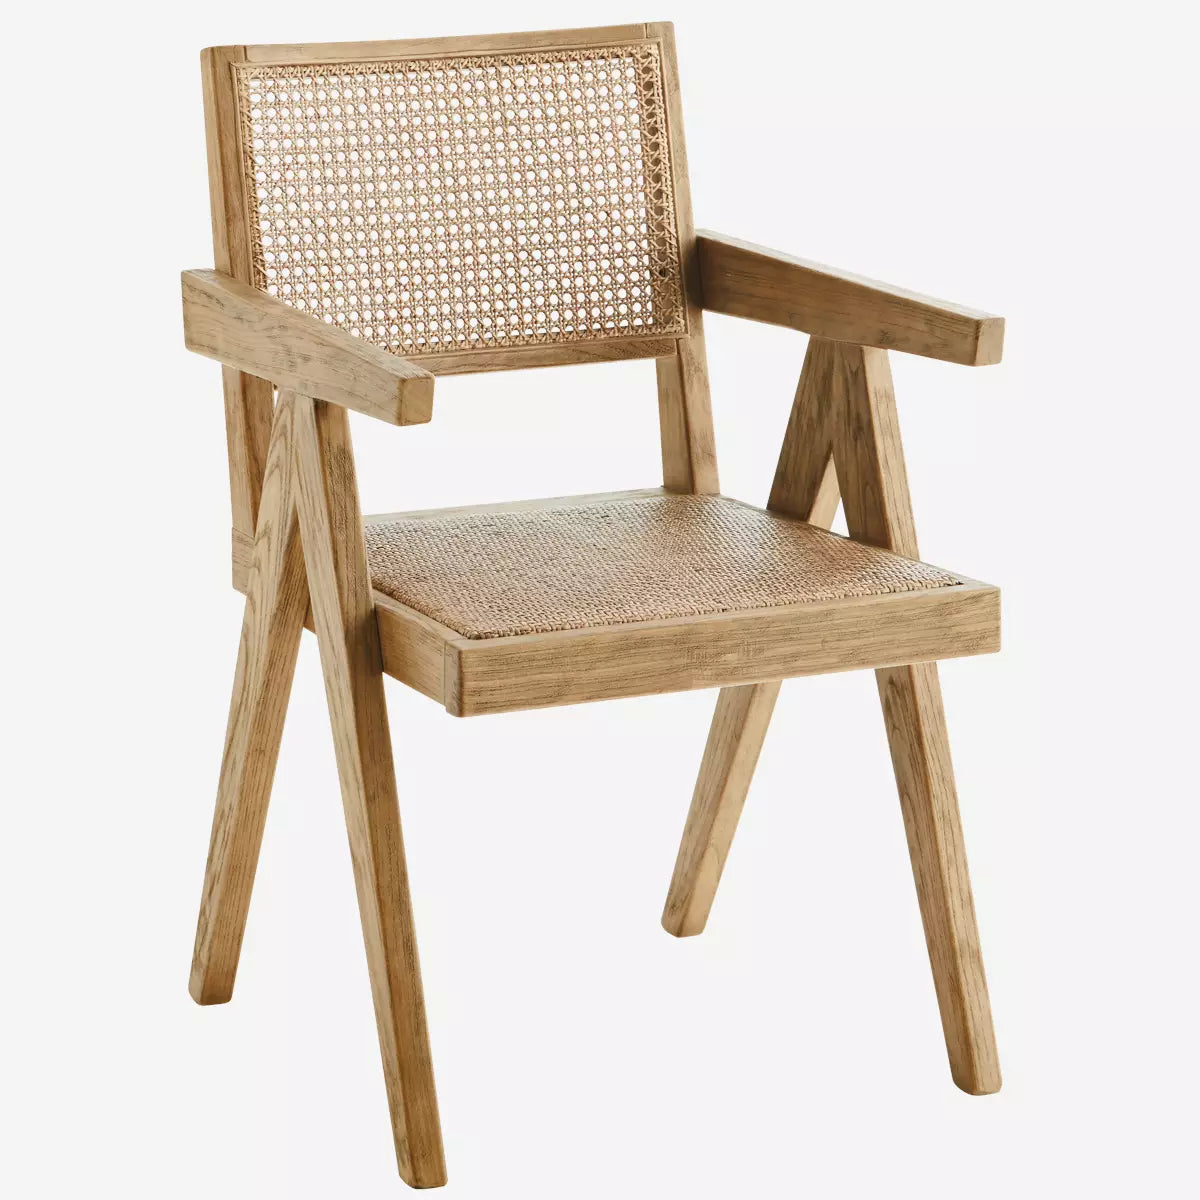 Elm Wood Chair With Rattan Seat & Back